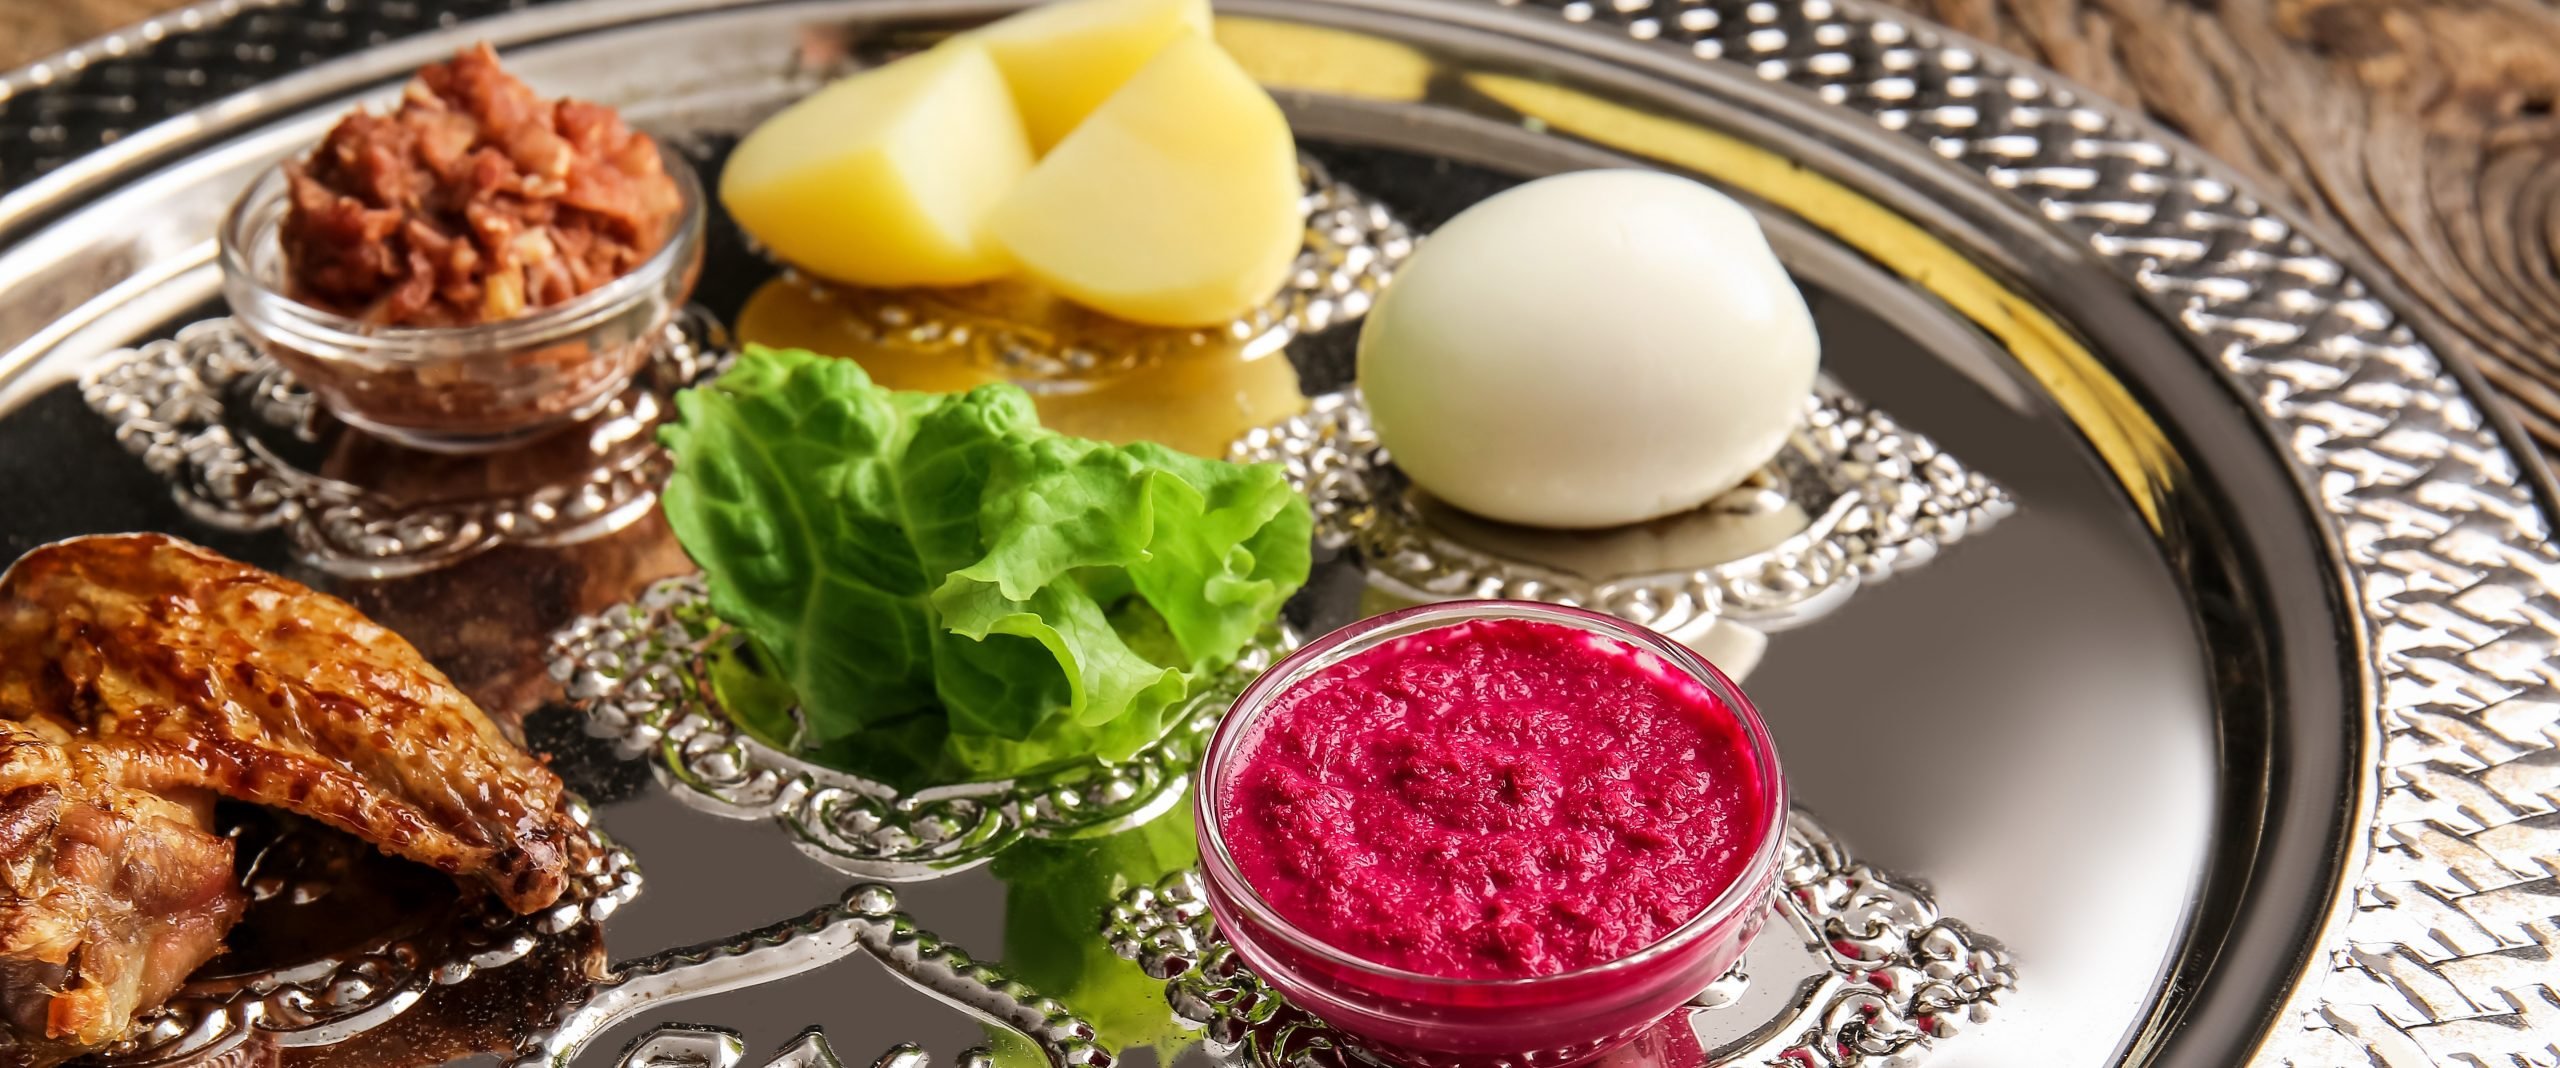 Passover Seder plate with traditional food on table, closeup